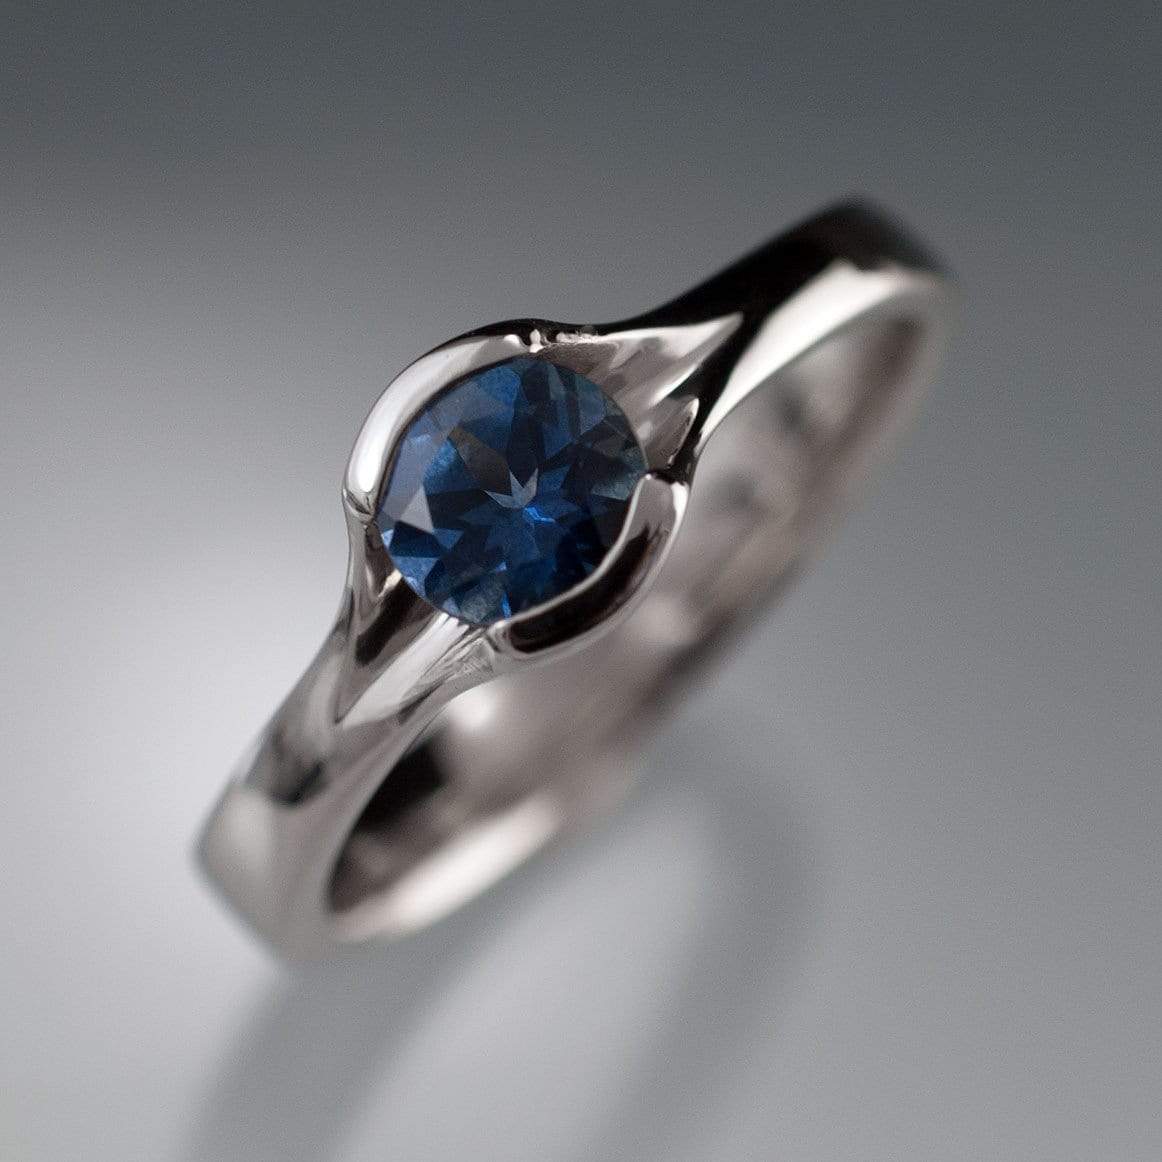 Round Fair Trade Blue Sapphire Fold Solitaire Engagement Ring Ring by Nodeform